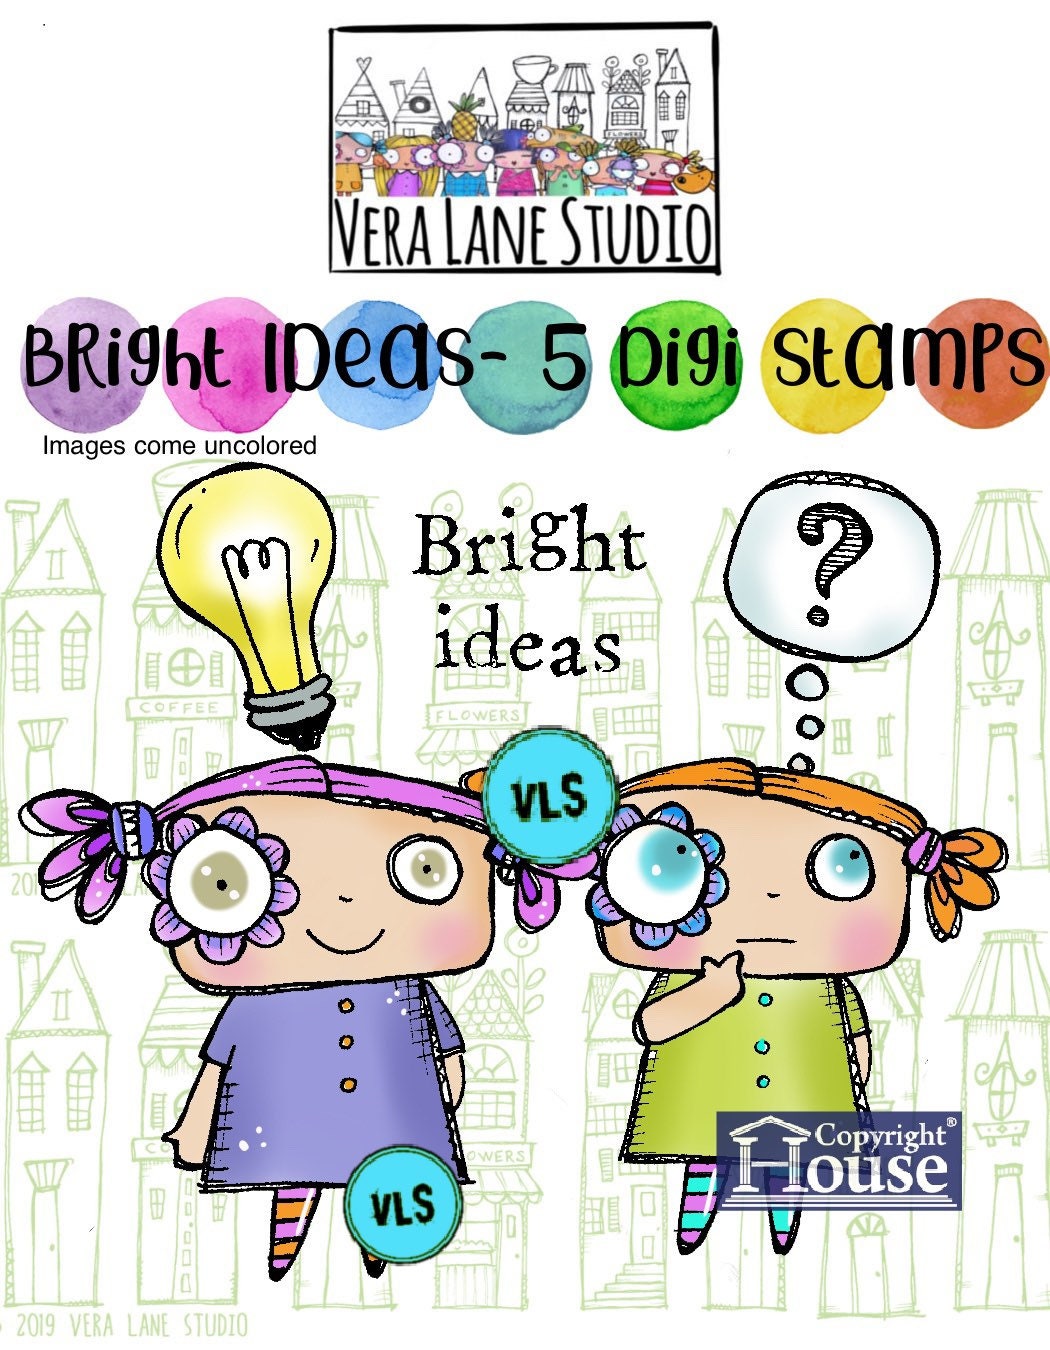 Bright Ideas - 6 digi stamp bundle in JPG and PNG files